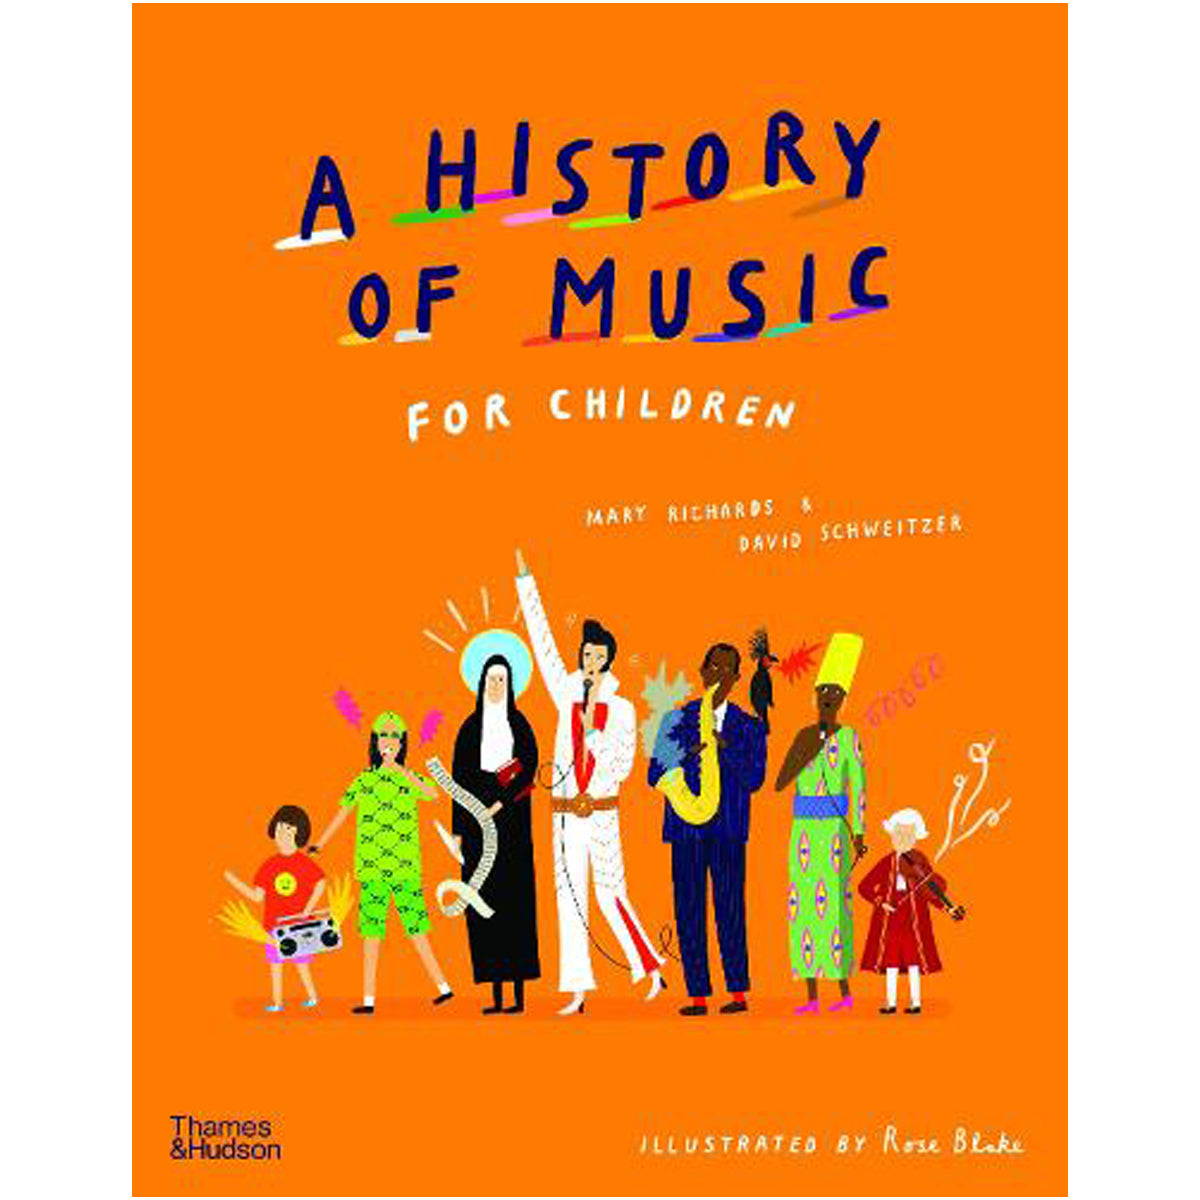  A History of Music for Children